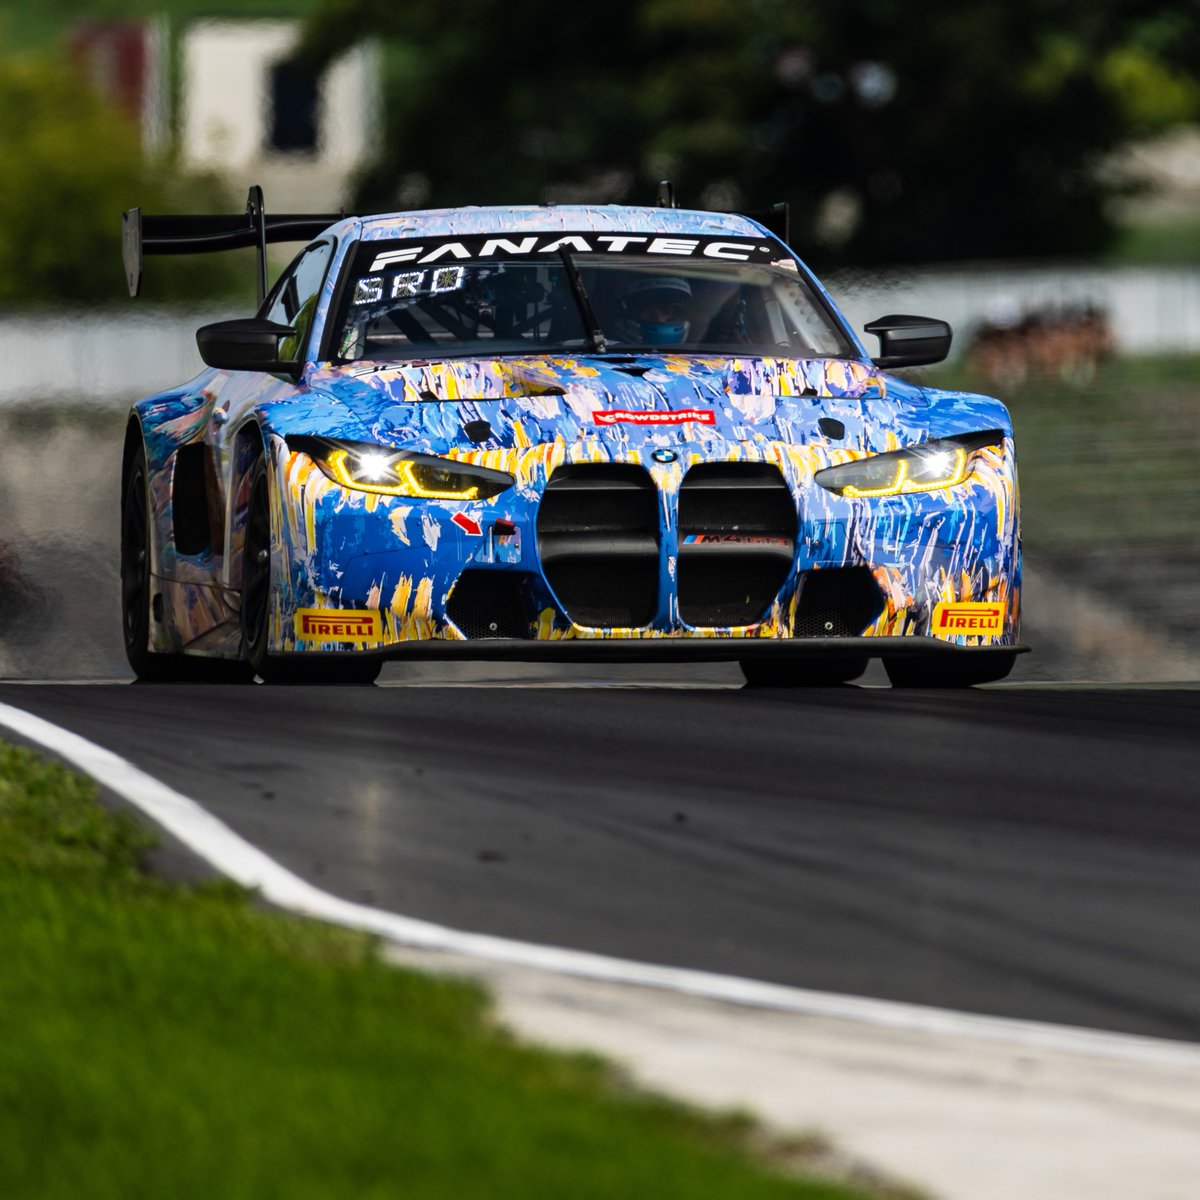 P2 x 2! 🥈🥈 Bill Auberlen and Chandler Hull finish @gtworldcham race 1 at Road America in P2 overall in the @bimmerworld BMW M4 GT3. @STR_Samantha and @NeilVerhagen cross the line in P4 overall and P2 in Pro-Am. Well done! 👏 📸 SRO